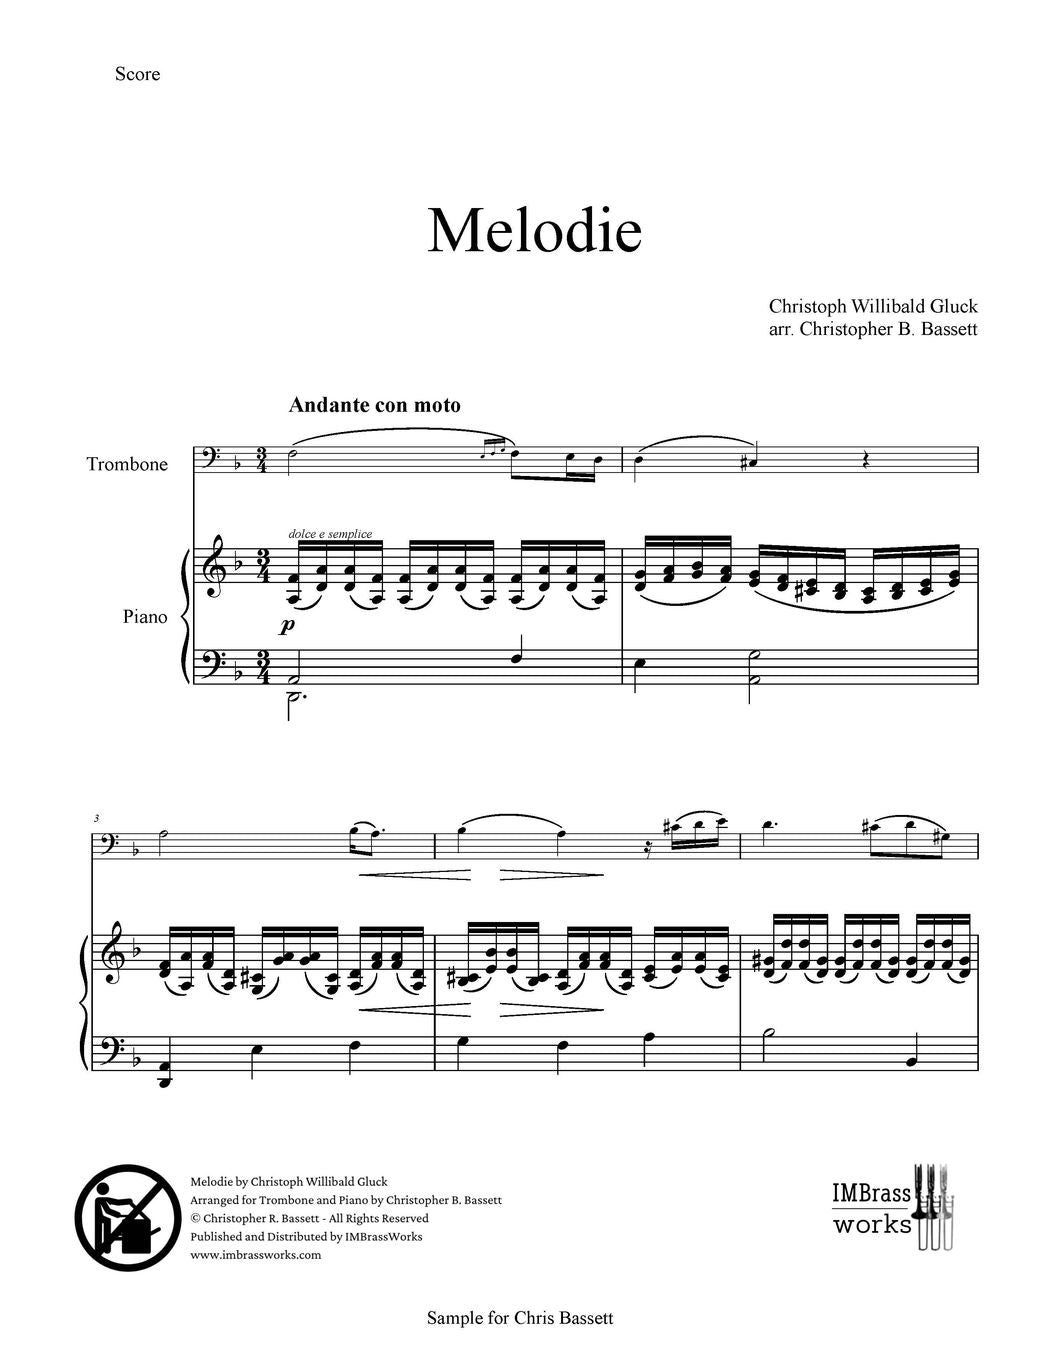 Gluck arr. Bassett: Melodie for Trombone and Piano